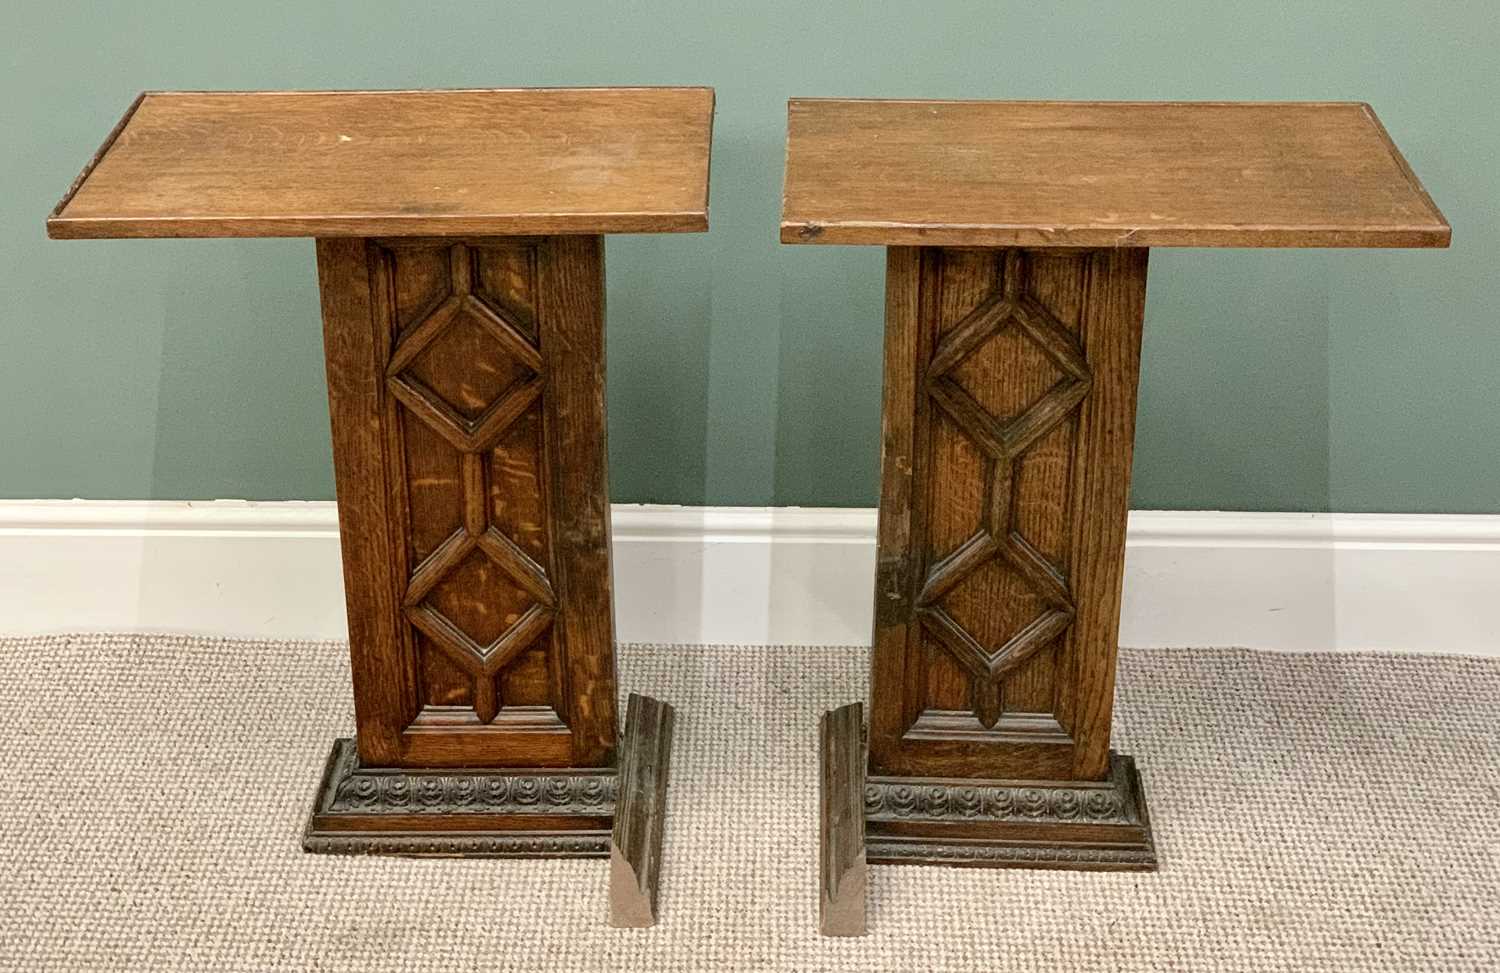 OAK SIDE TABLES - a pair, rectangular tops and columns with geometric moulding detail, on carved - Image 2 of 2